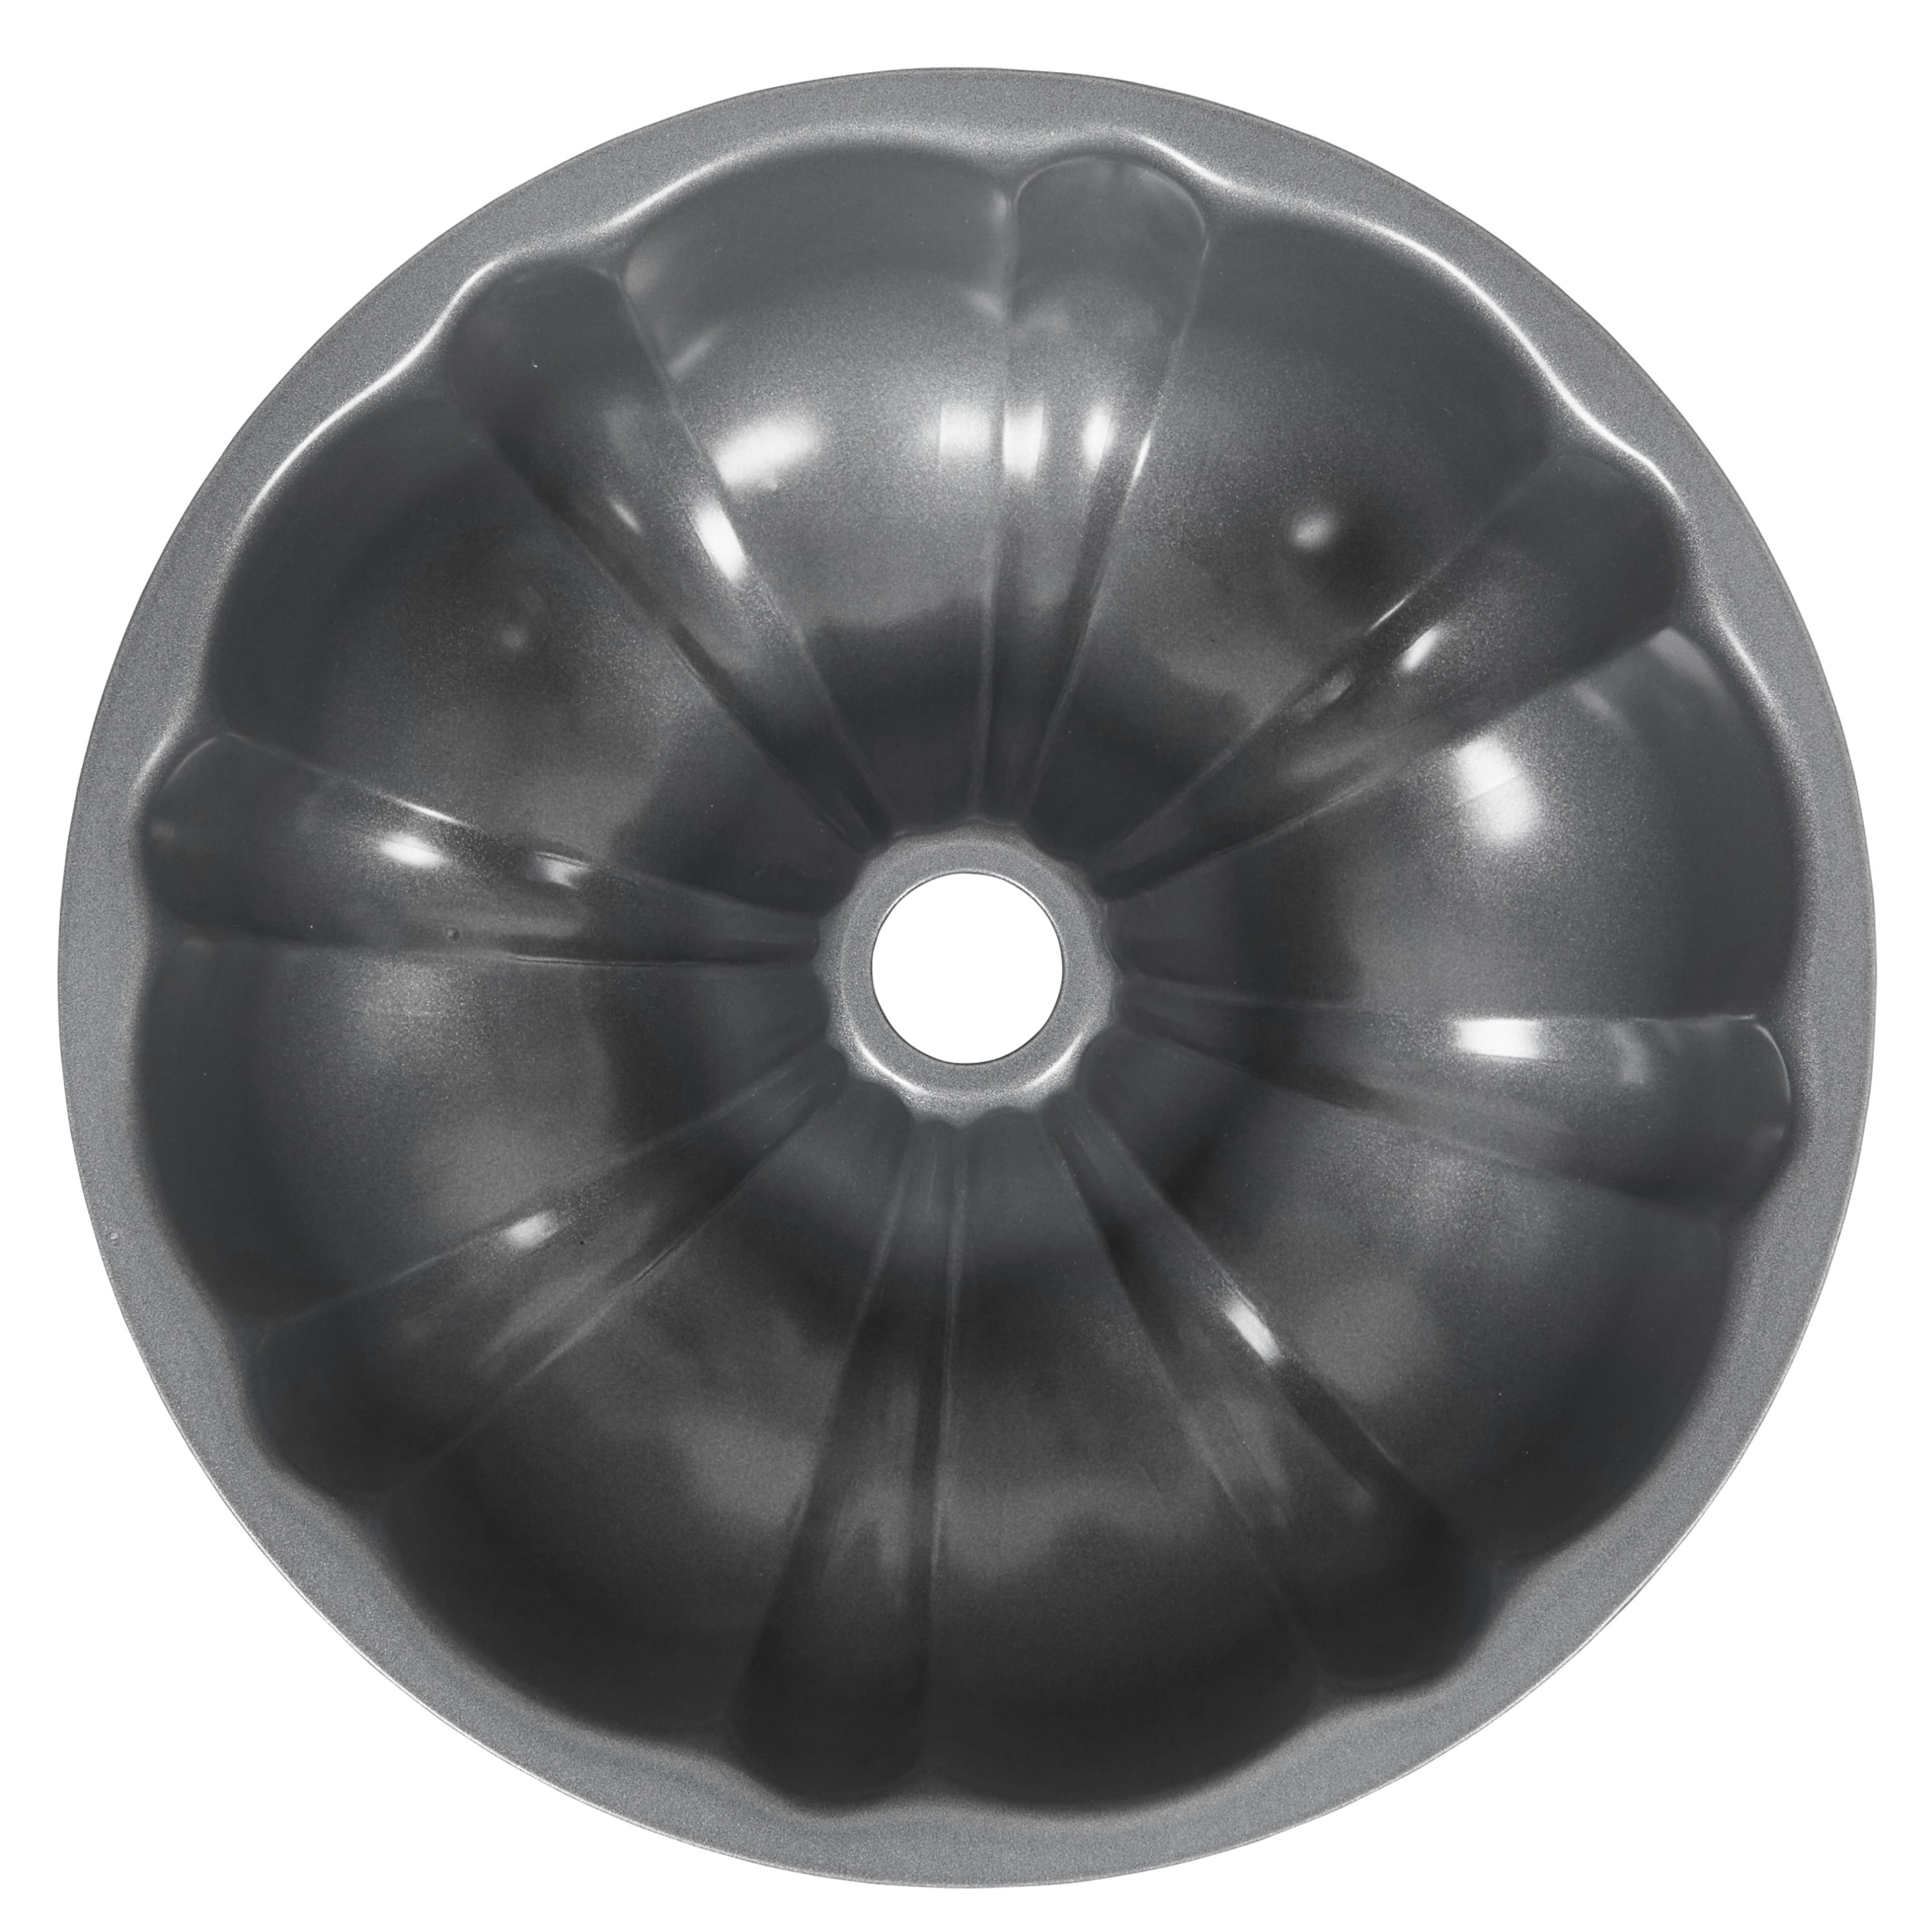 Tosnail 9-Inch Non-Stick Fluted Cake Pan Round Cake Pan Specialty